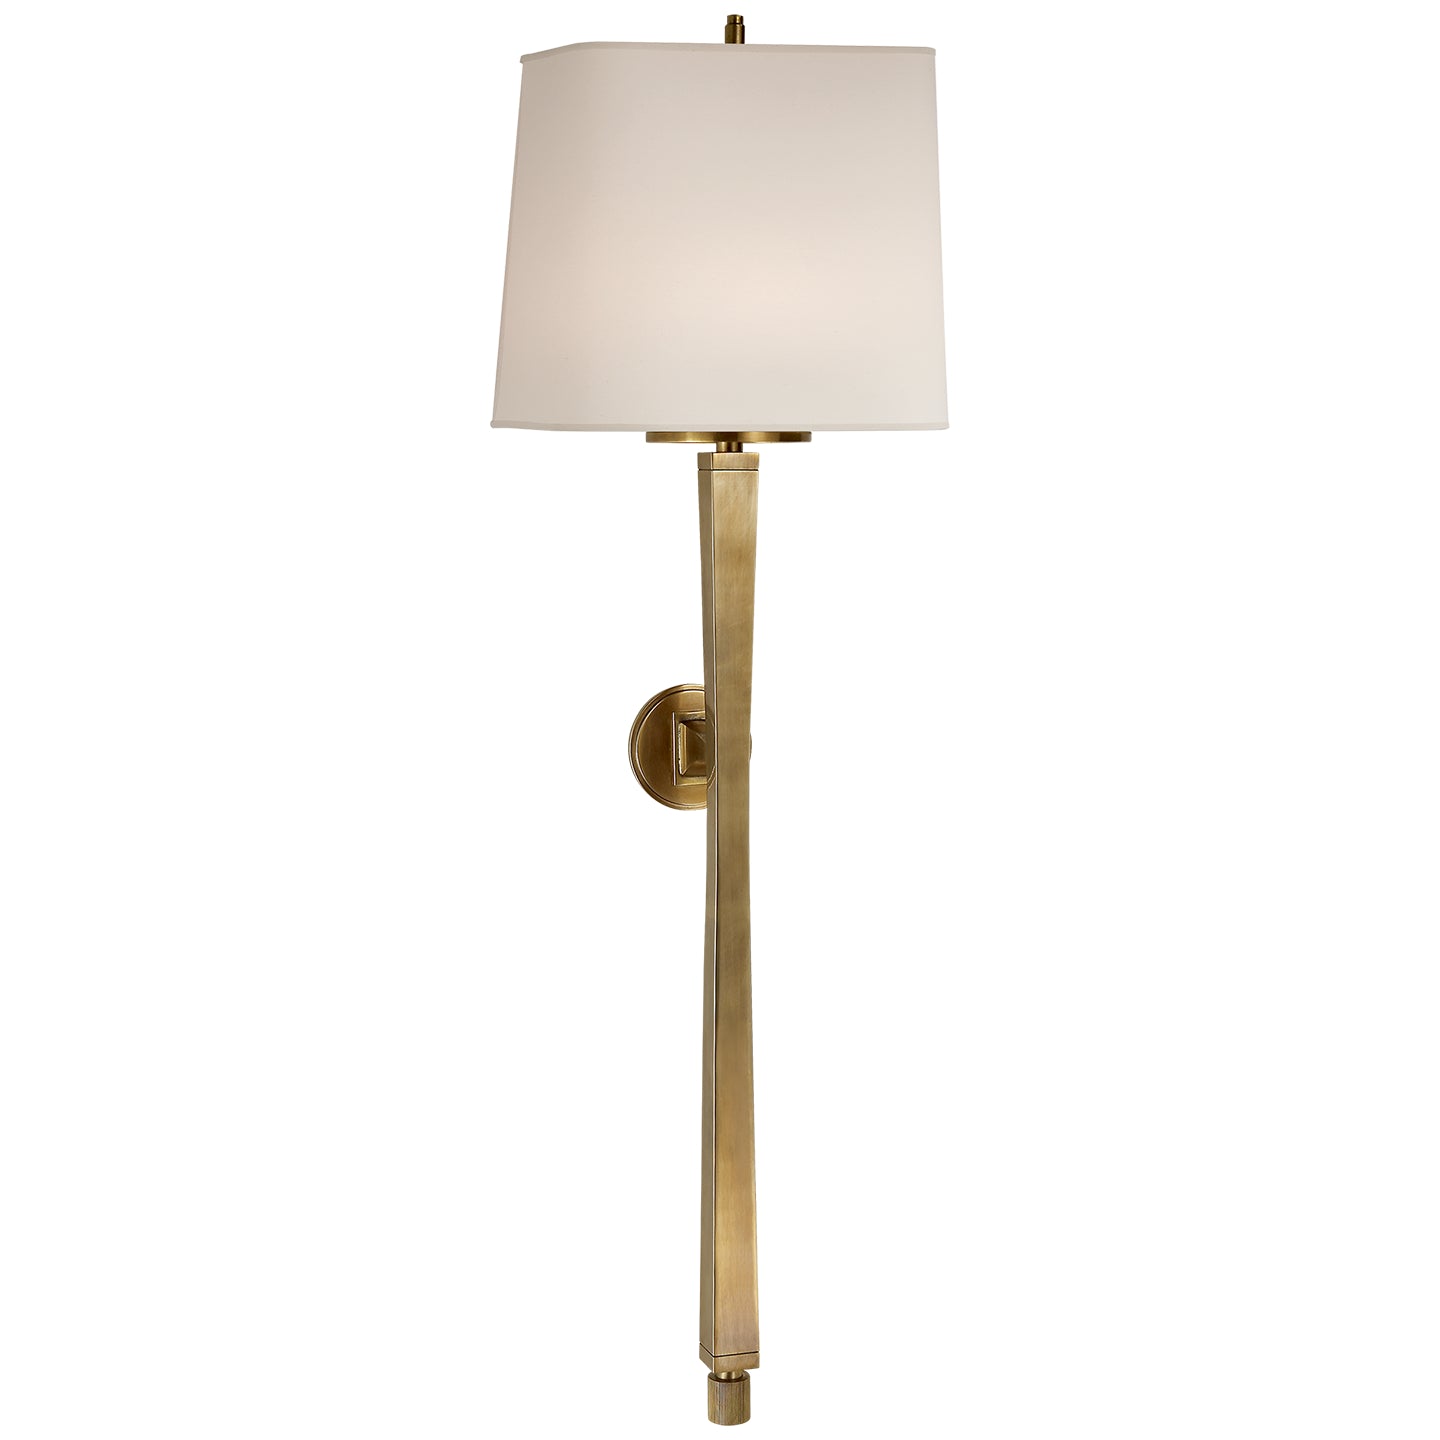 Visual Comfort Signature - TOB 2741HAB-NP - Two Light Wall Sconce - Edie - Hand-Rubbed Antique Brass